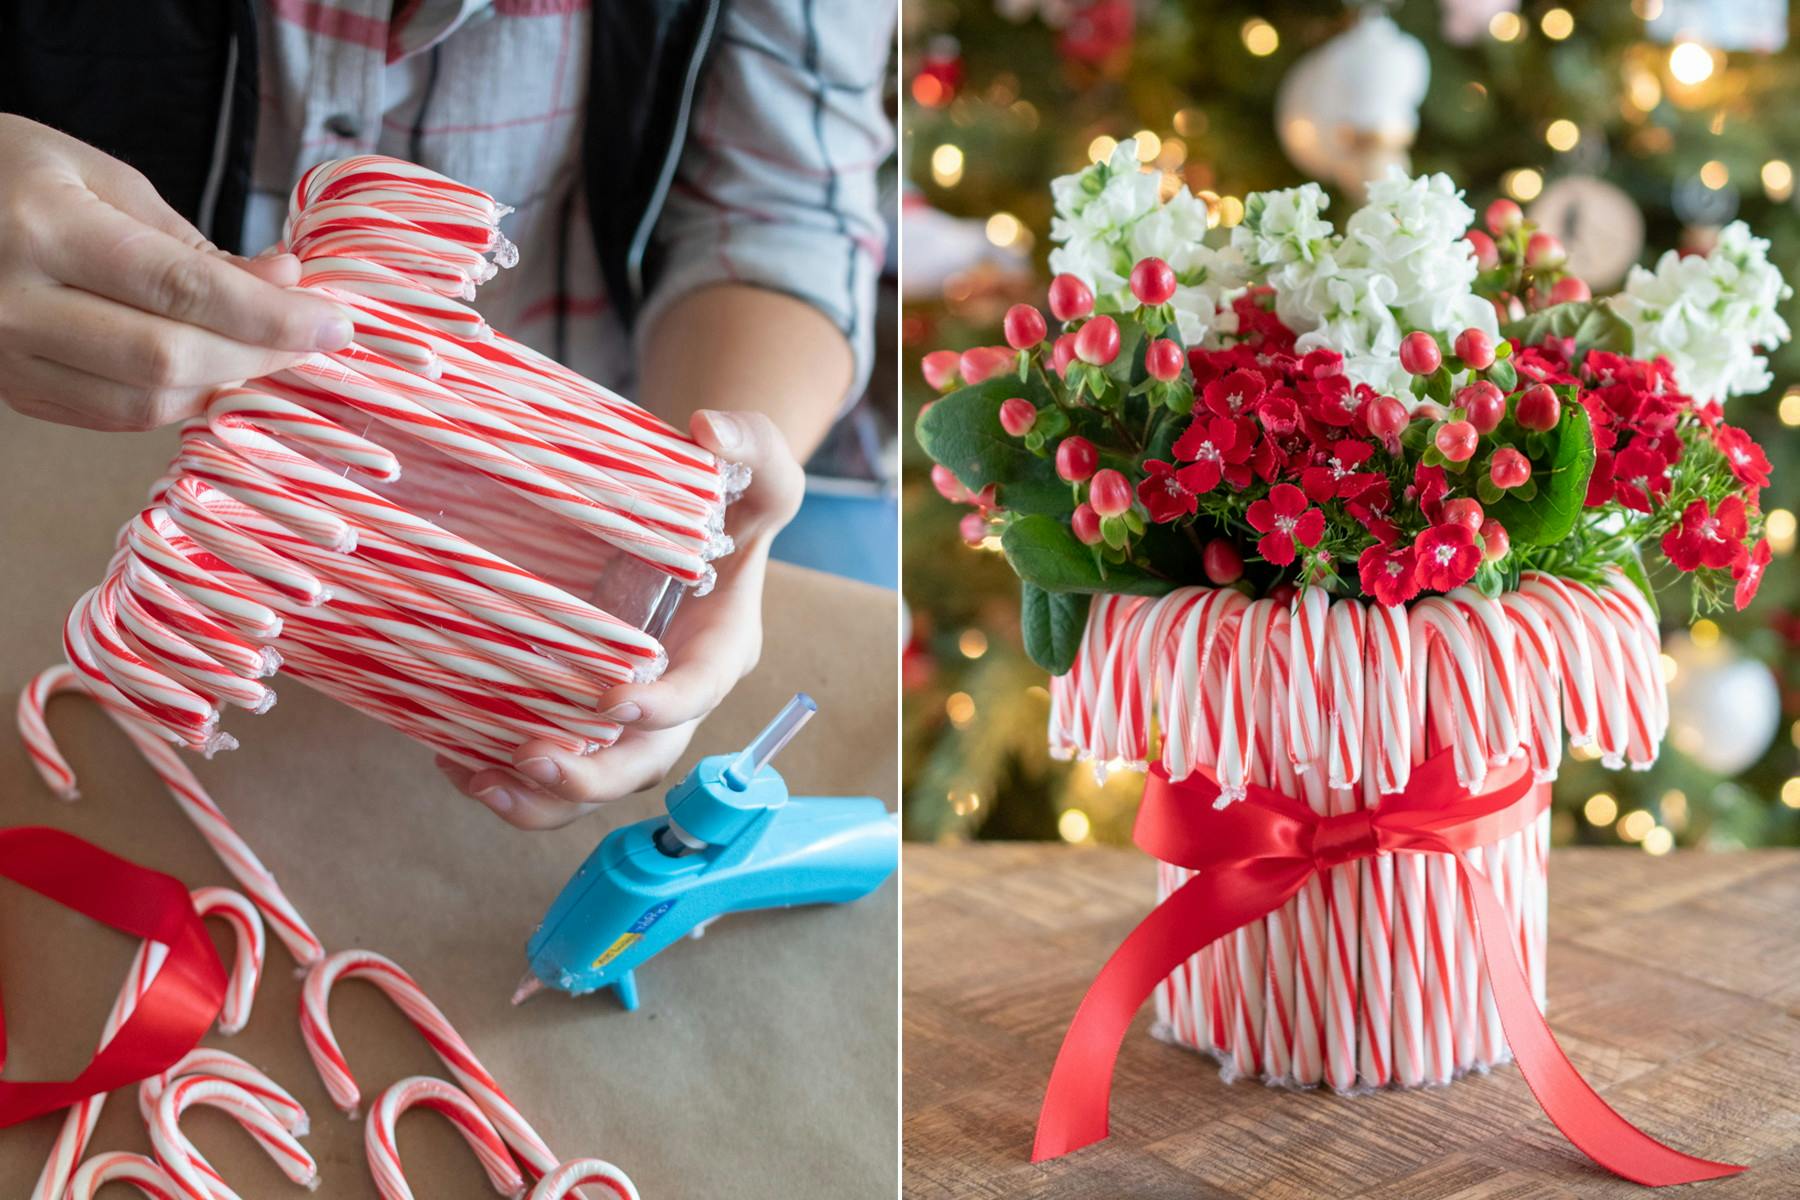 Candy Canes hot glued around a round vase filled with flowers and tied with a red ribbon.